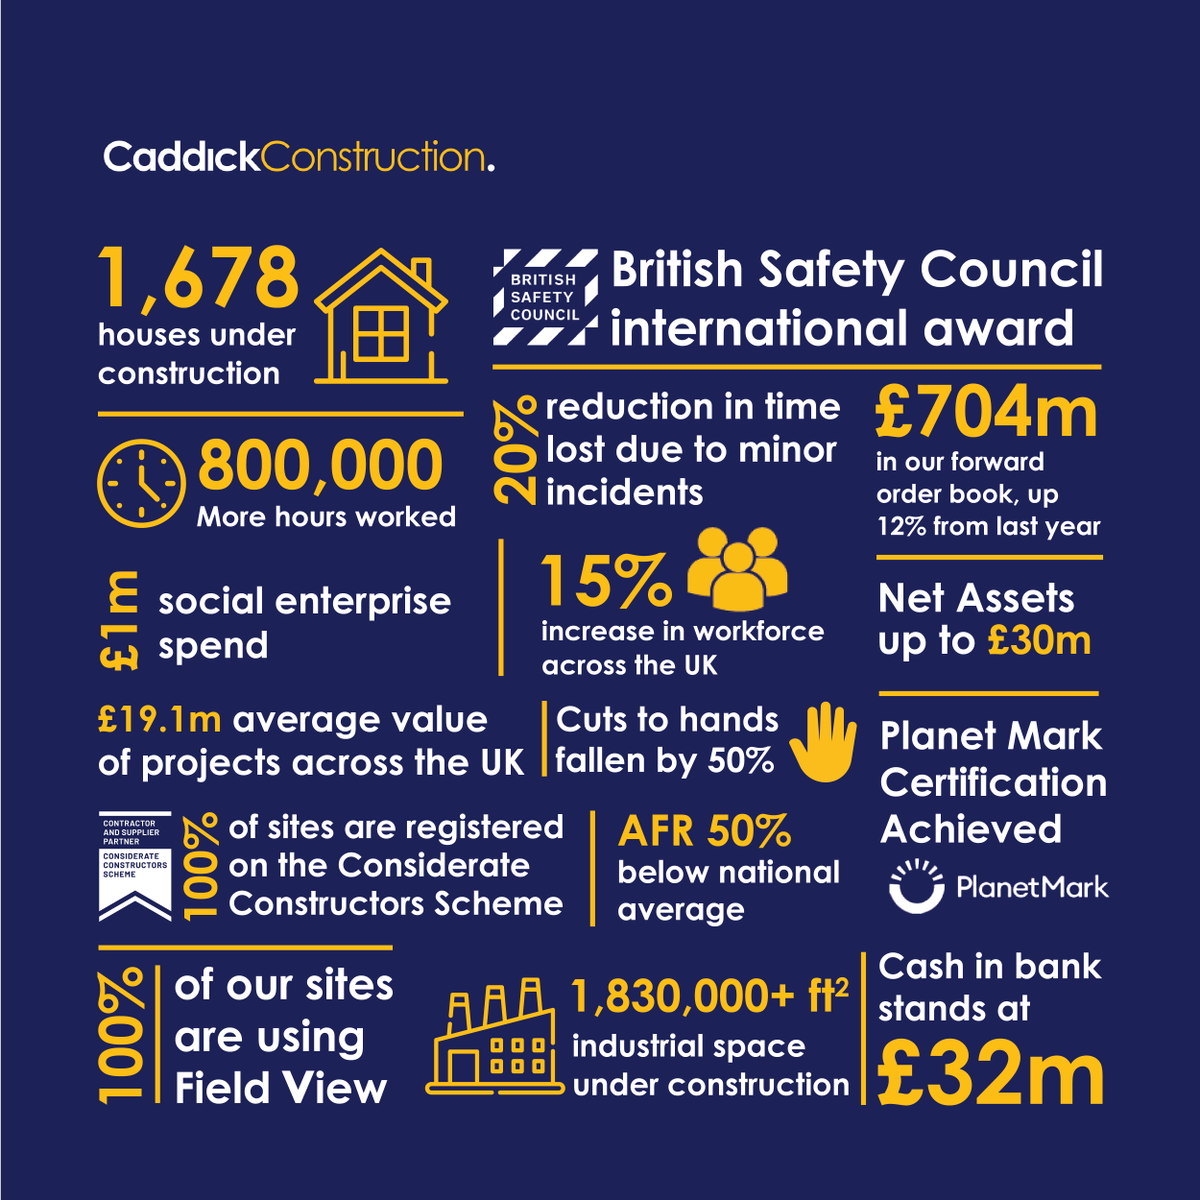 Following the release of our annual results for the last financial year, we’re pleased to reveal that the year also saw us invest in the communities in which we work and the health and safety of our teams. Read more about our results: ow.ly/K7NE50RCcQr